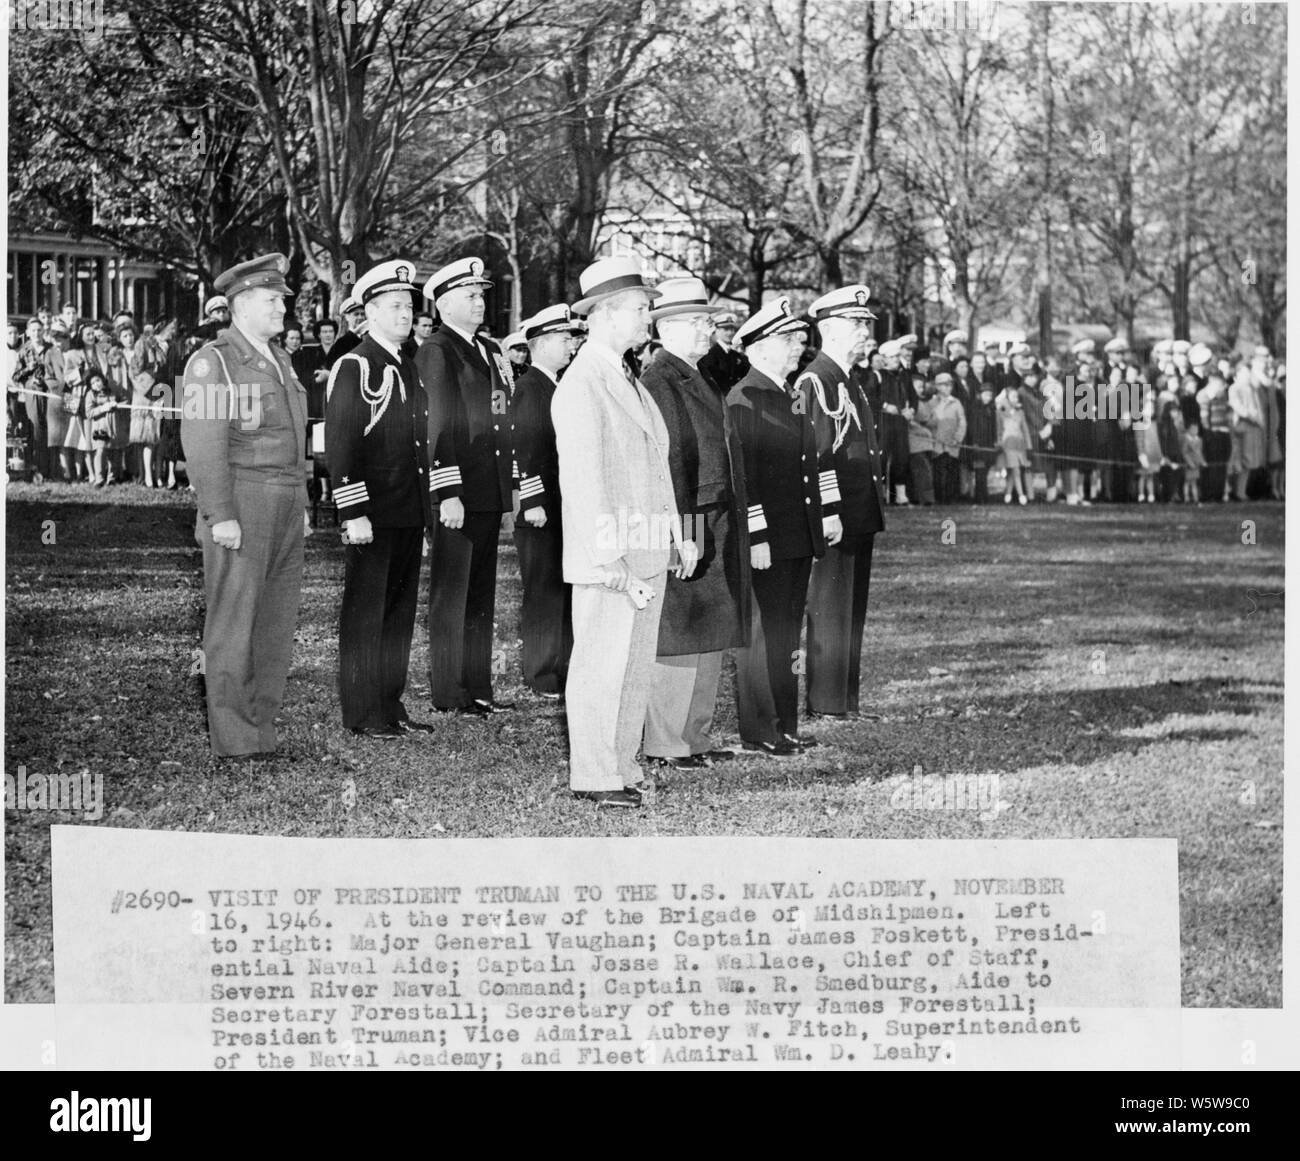 Photograph of President Truman watching the Brigade of Midshipmen pass in review, during his visit to the U.S. Naval Academy: (left to right) General Harry Vaughan, Military Aide to the President; Captain James Foskett, Naval Aide to the President; Captain Jesse R. Wallace, Chief of Staff, Severn River Naval Command; Captain W. R. Smedburg, aide to Secretary Forrestal; Secretary of the Navy James Forrestal; the President; Vice Admiral Aubrey Fitch, Superintendent of the Naval Academy; and Fleet Admiral William D. Leahy. Stock Photo